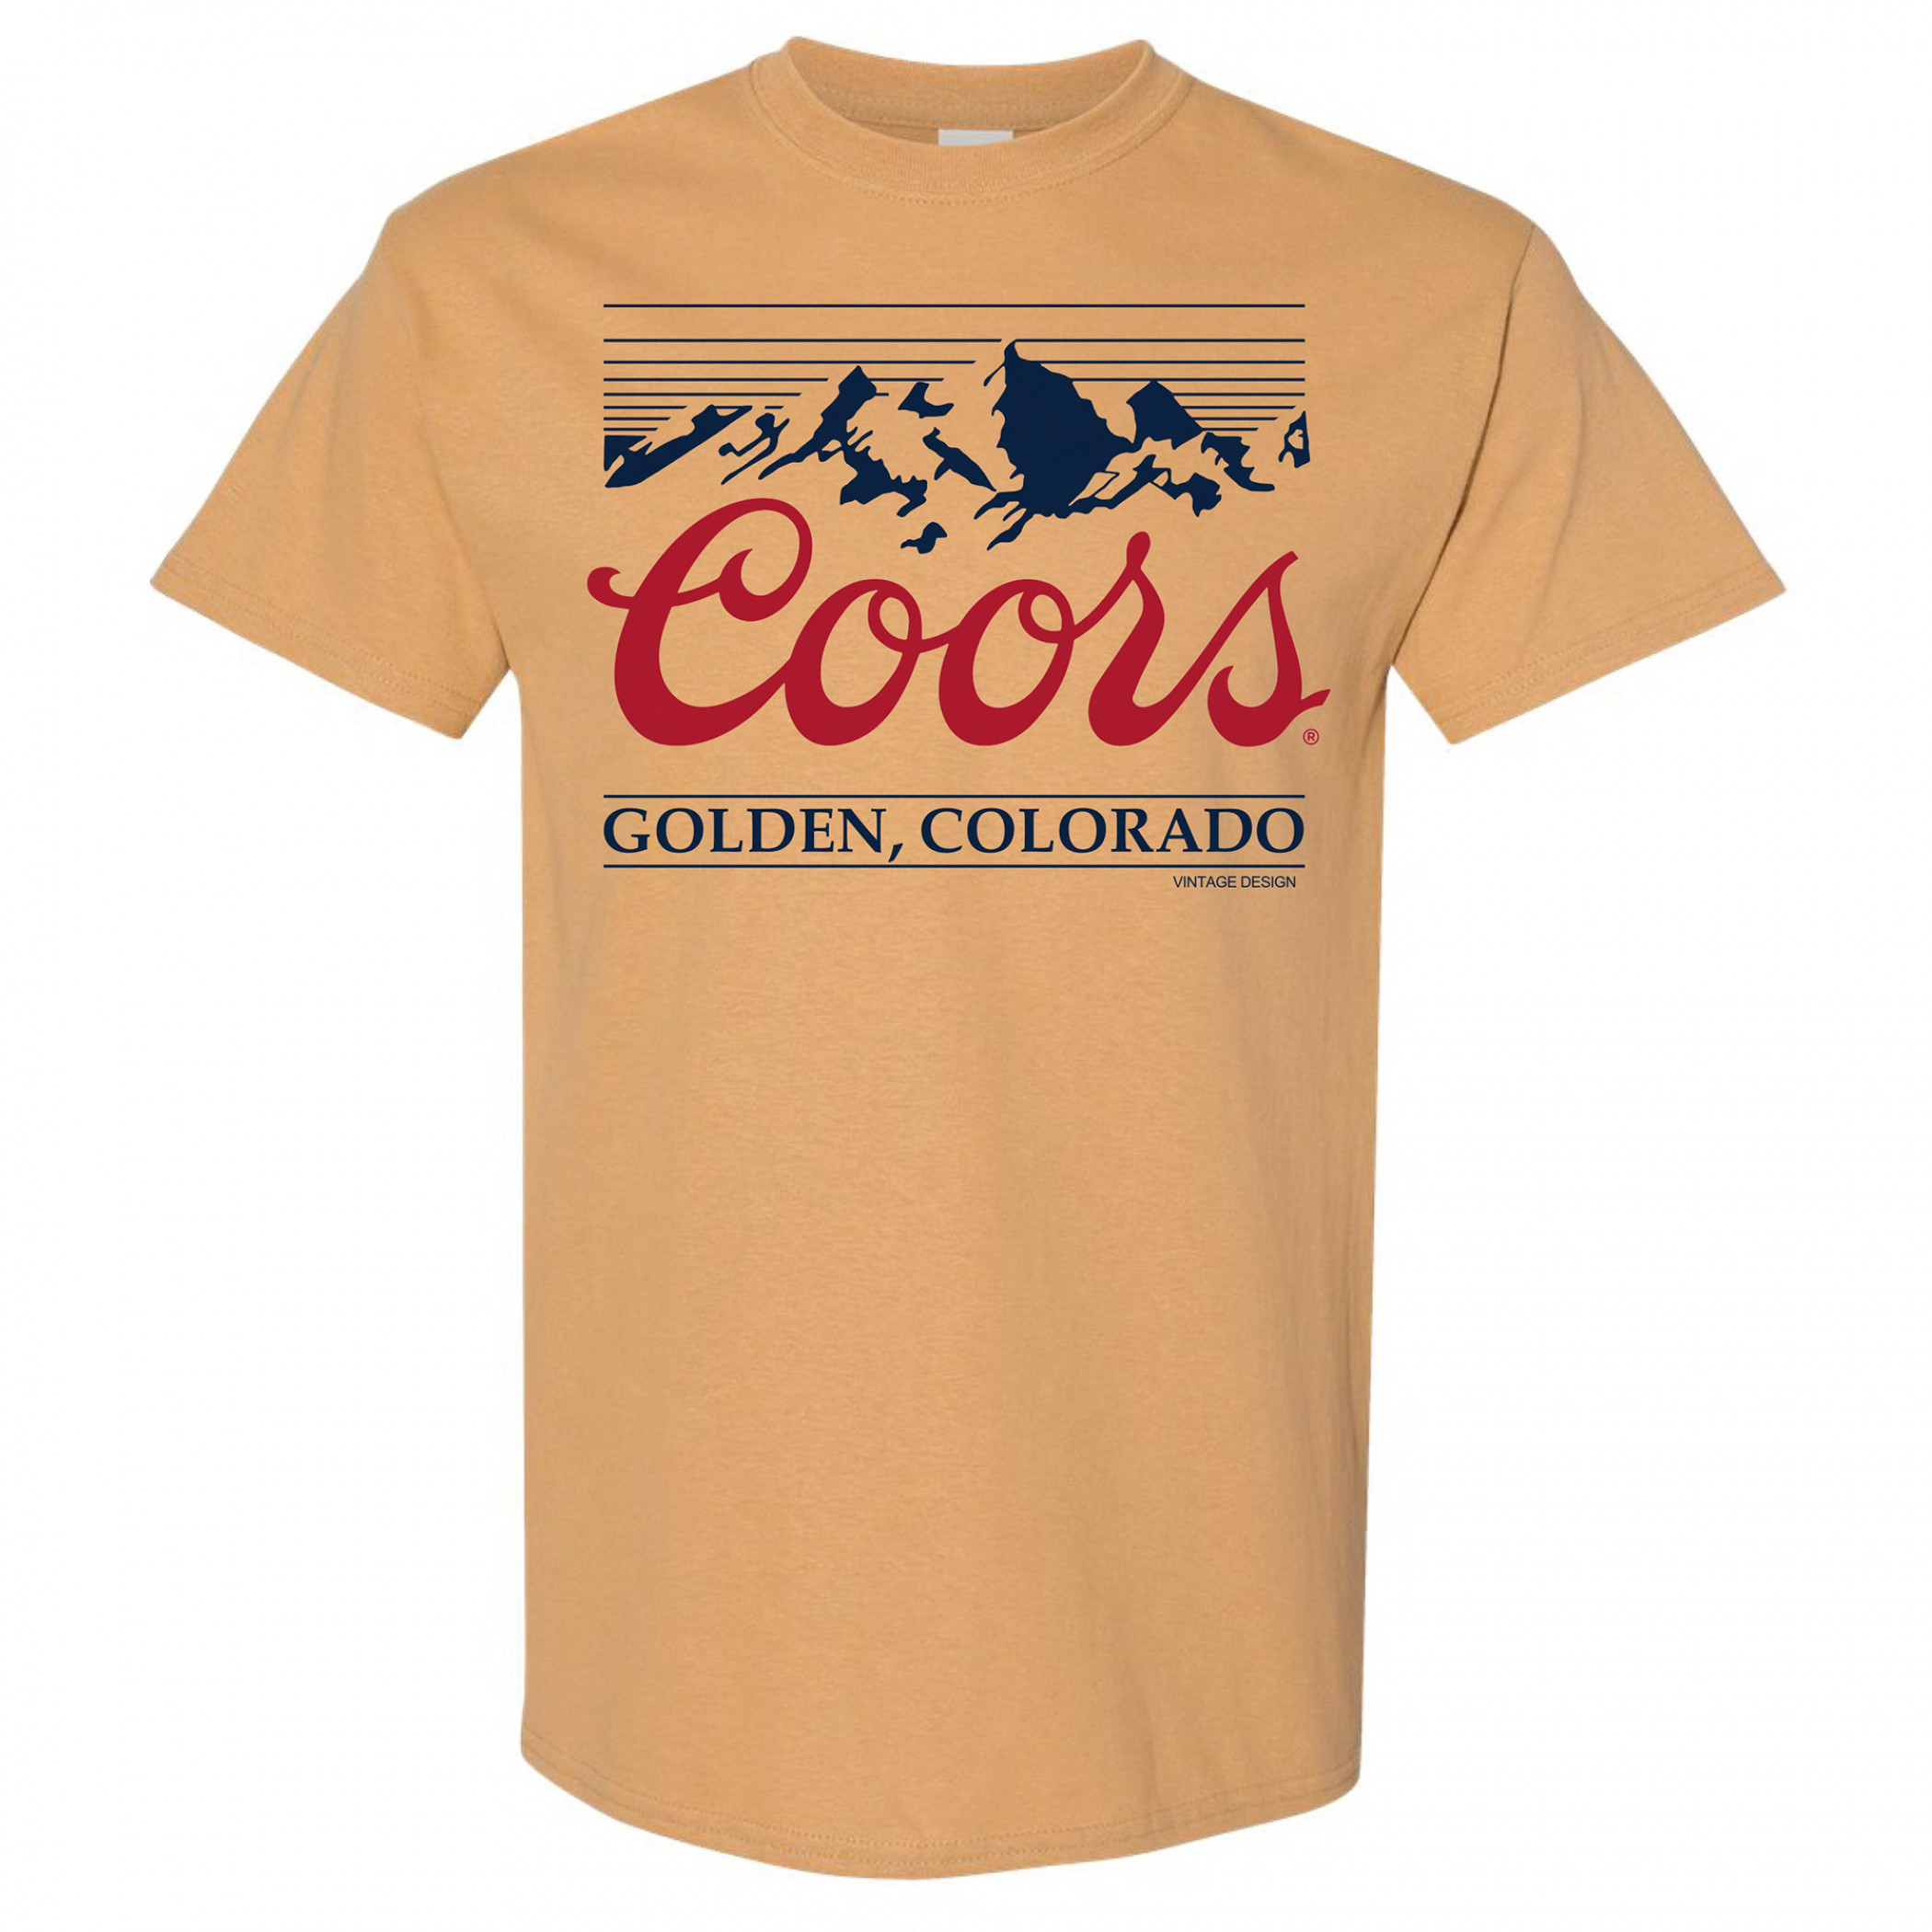 Coors Golden Colorado Gold Colorway T-Shirt